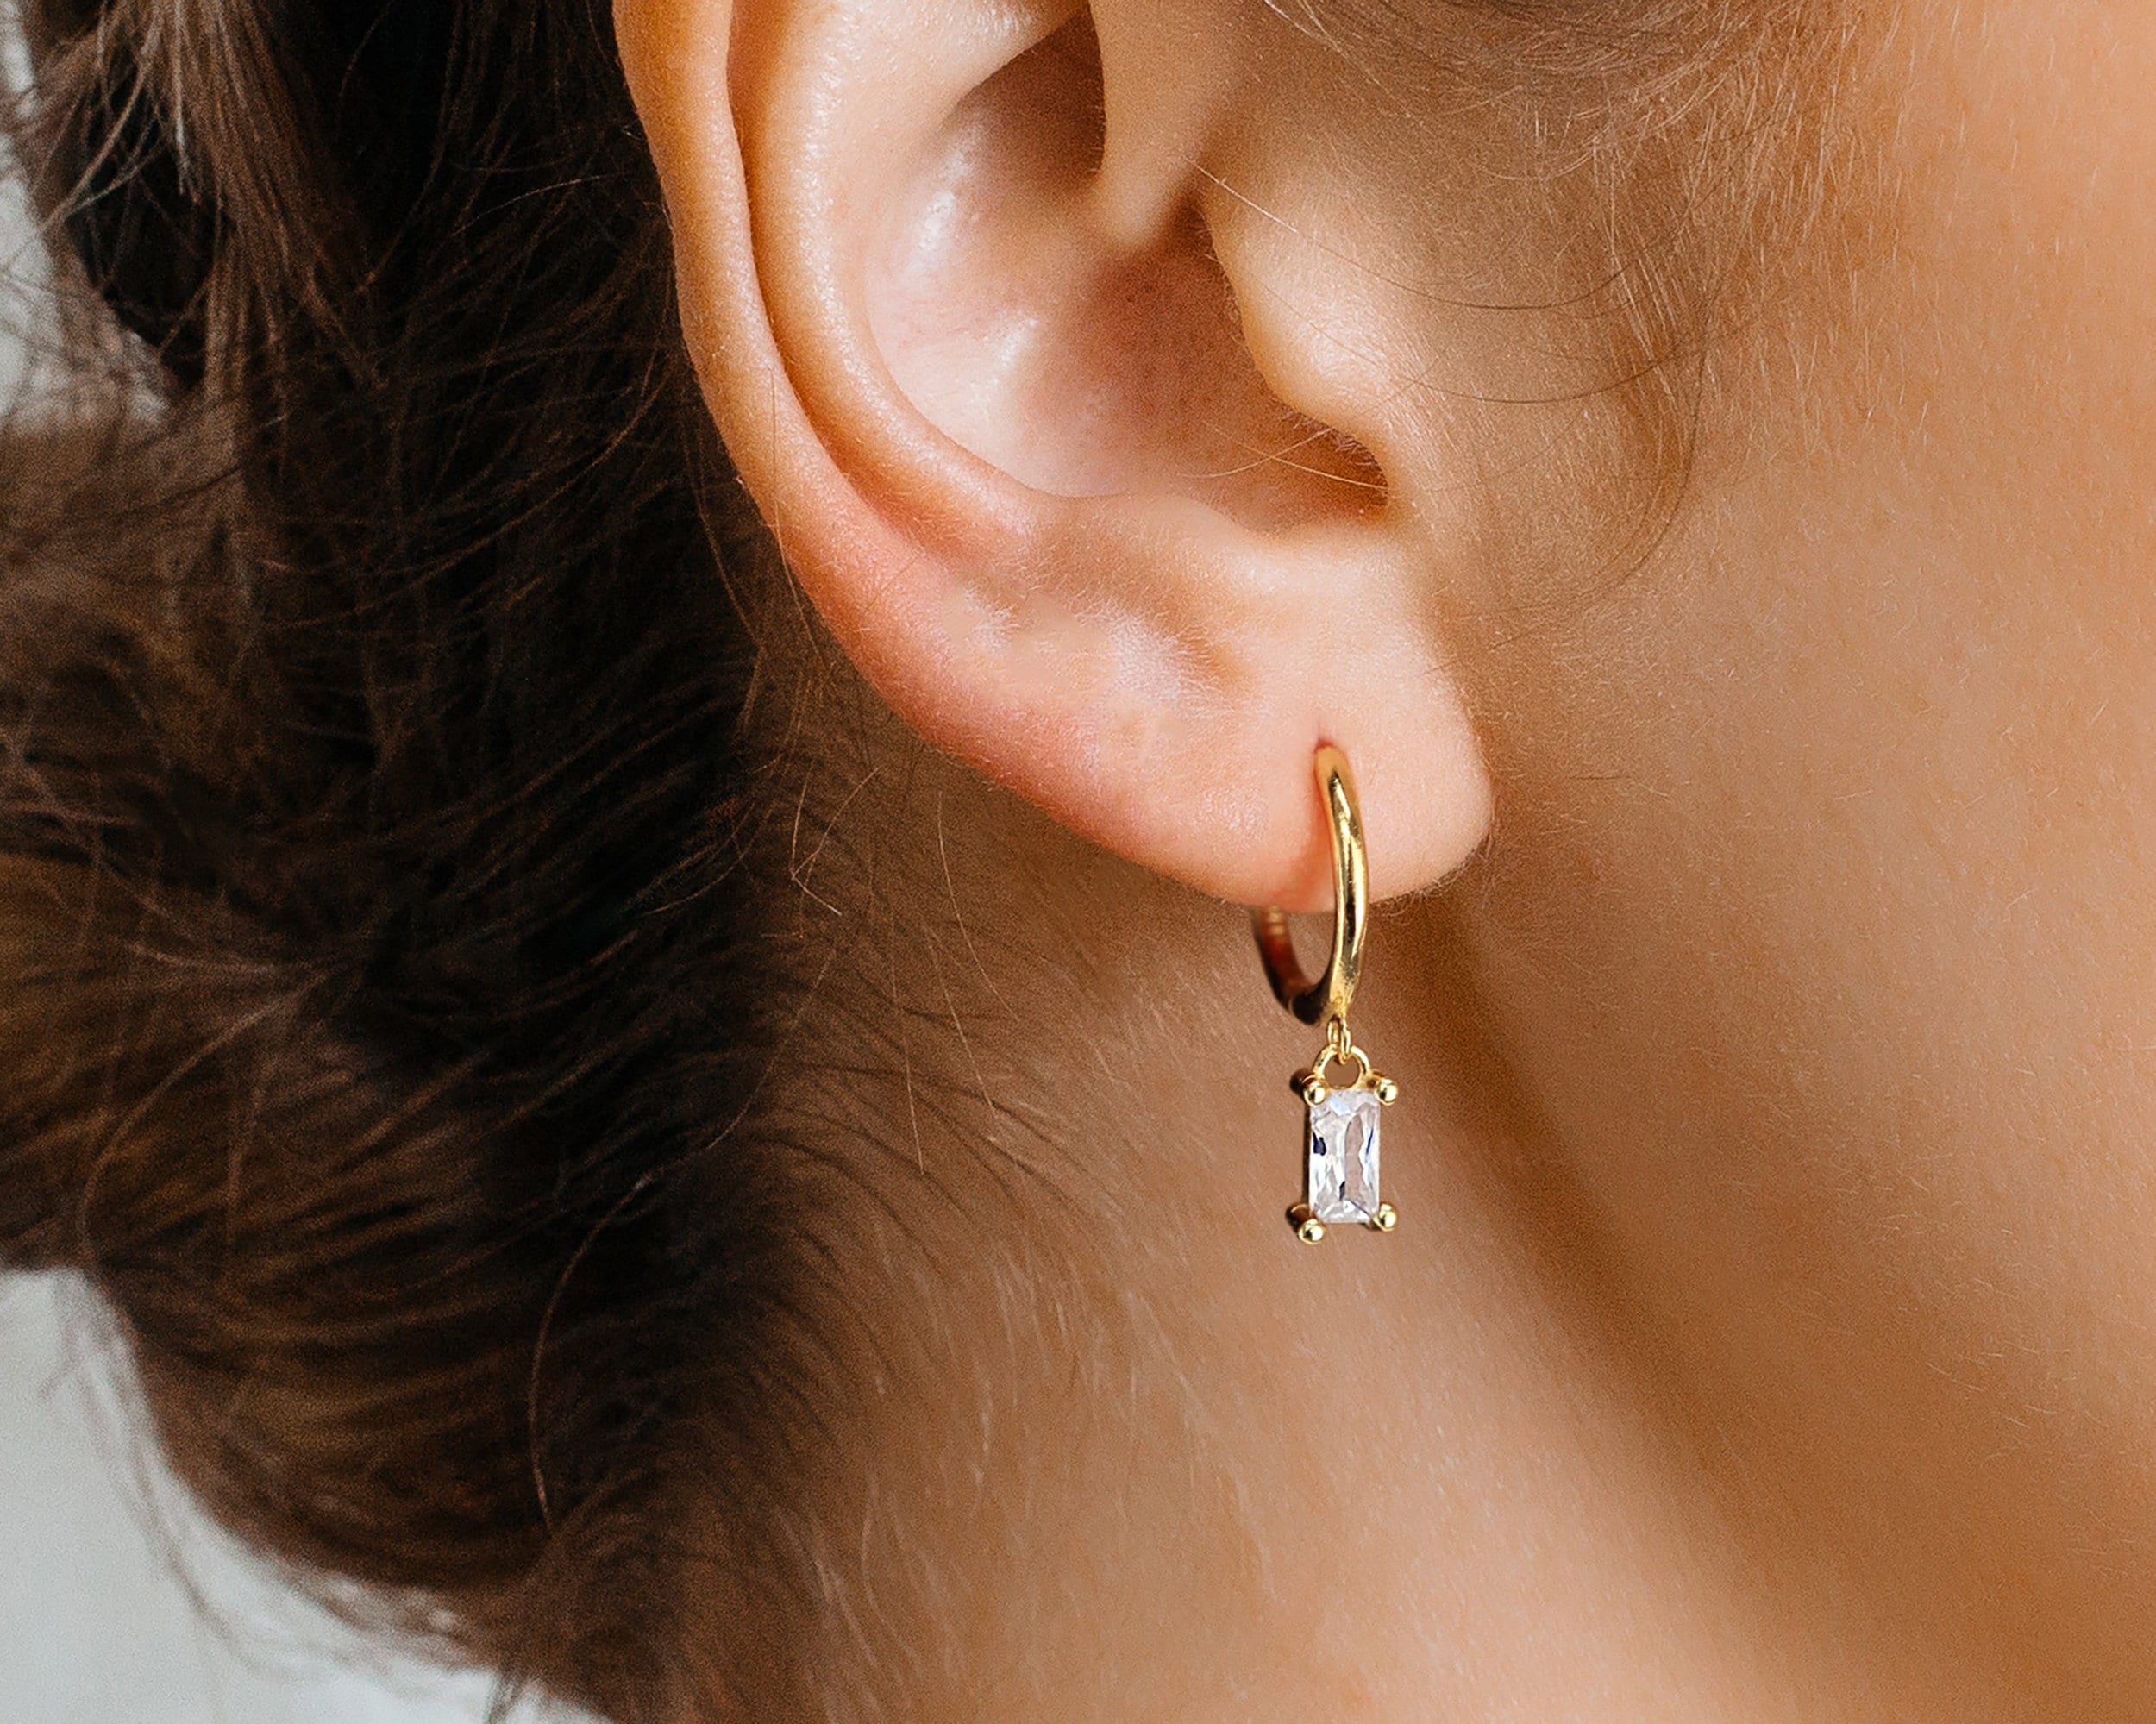 Color Blossom Star Ear Stud, Pink Gold And White Mother-Of-Pearl - Per Unit  - Jewelry - Categories